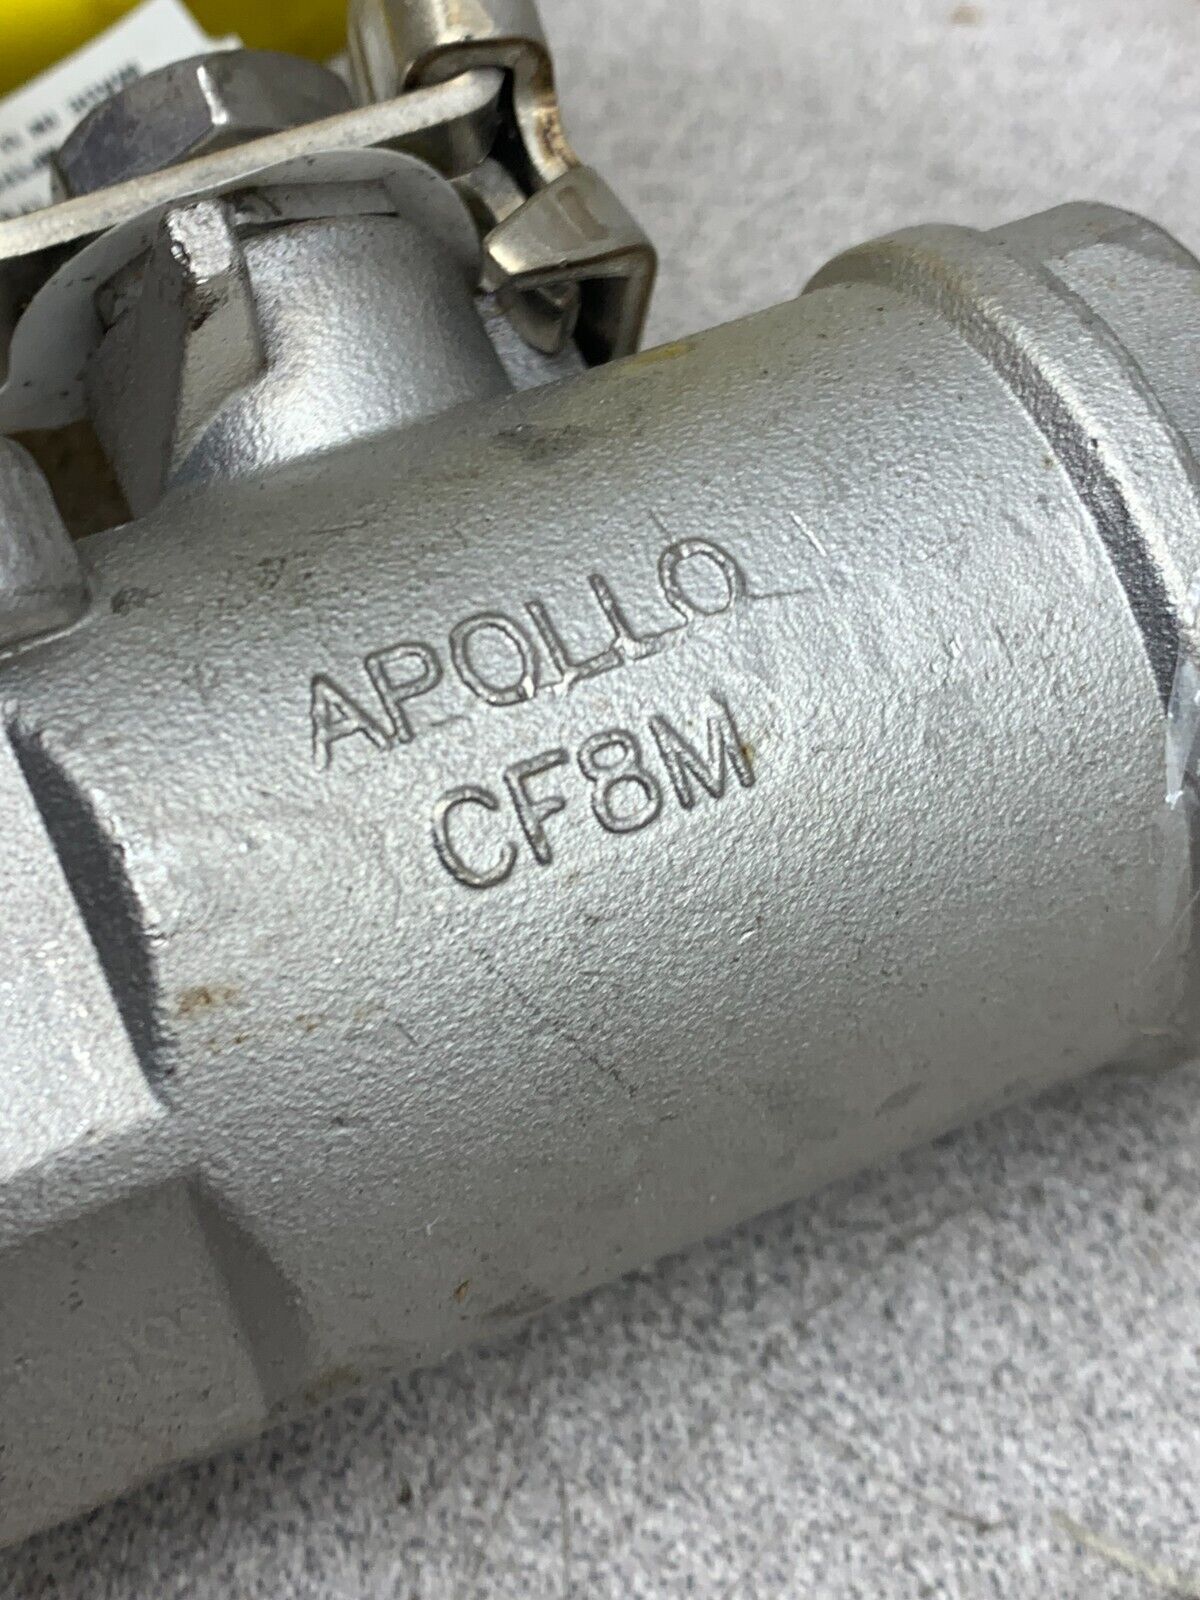 NEW APOLLO 1" 2000 WOG. CF8M STAINLESS STEEL BALL VALVE 76-105-39A